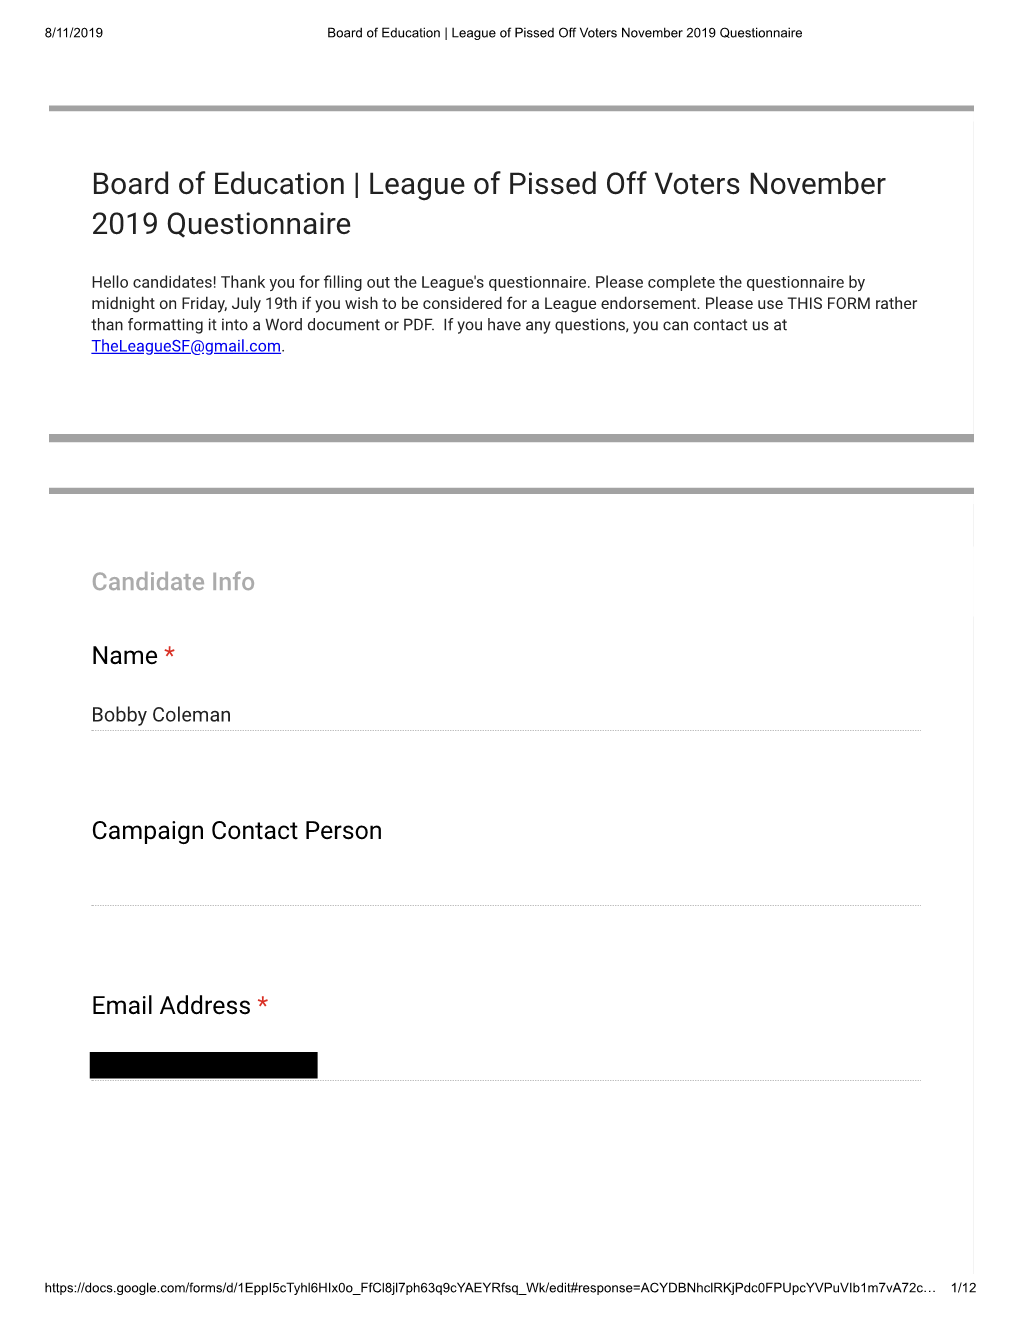 Board of Education | League of Pissed Off Voters November 2019 Questionnaire